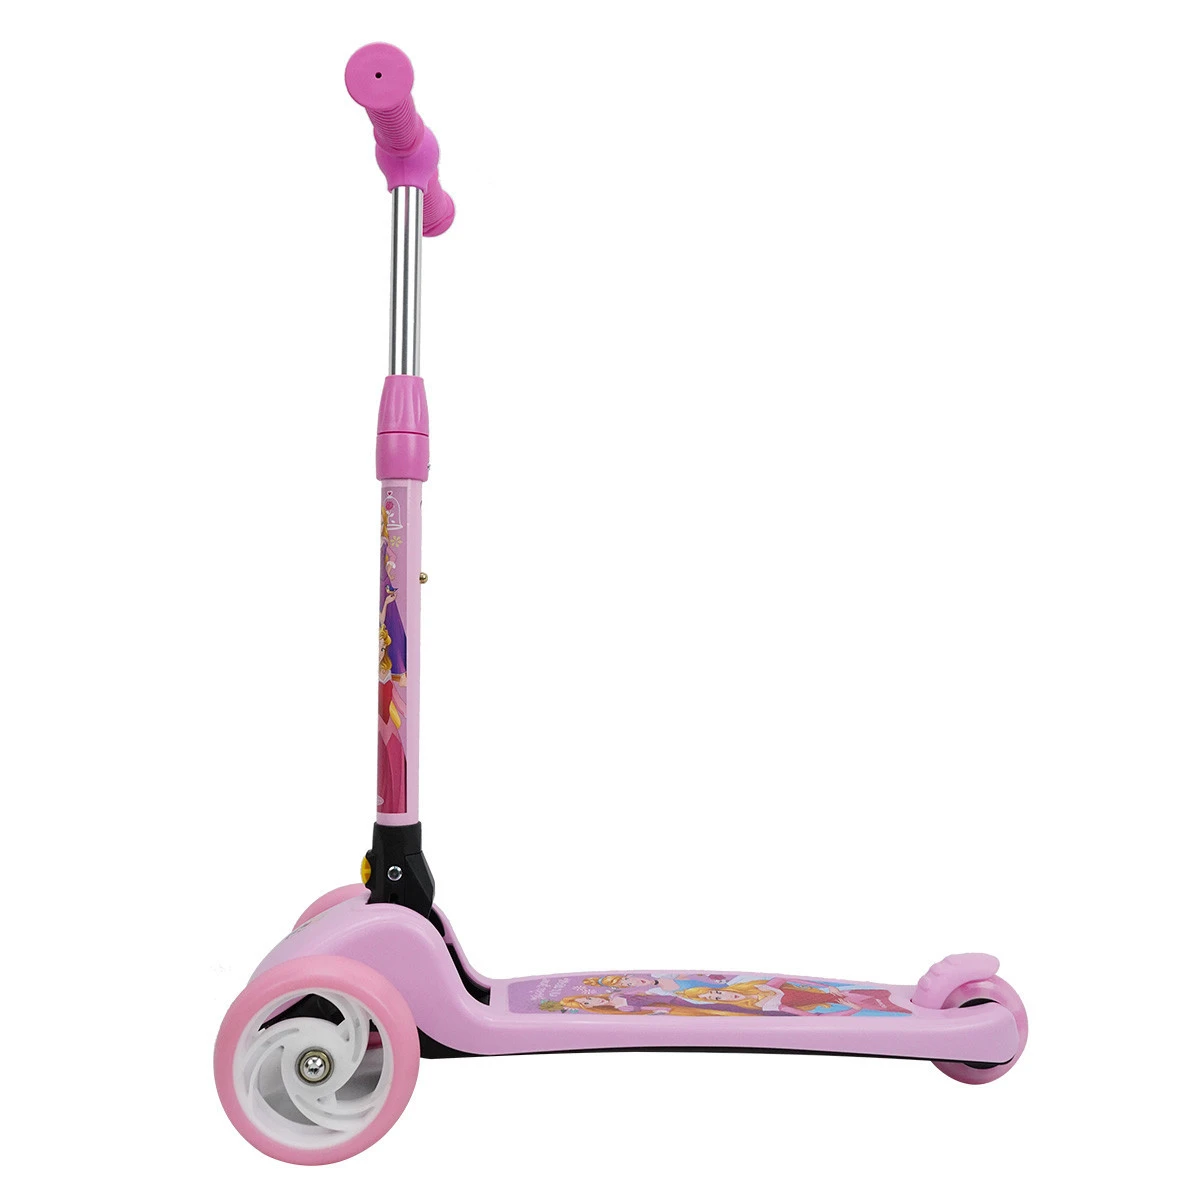 Disney Princess Ready to Ship Scooter Folding Adjustable Pink Color Foot Scooter With 3 Light Wheels For Kids